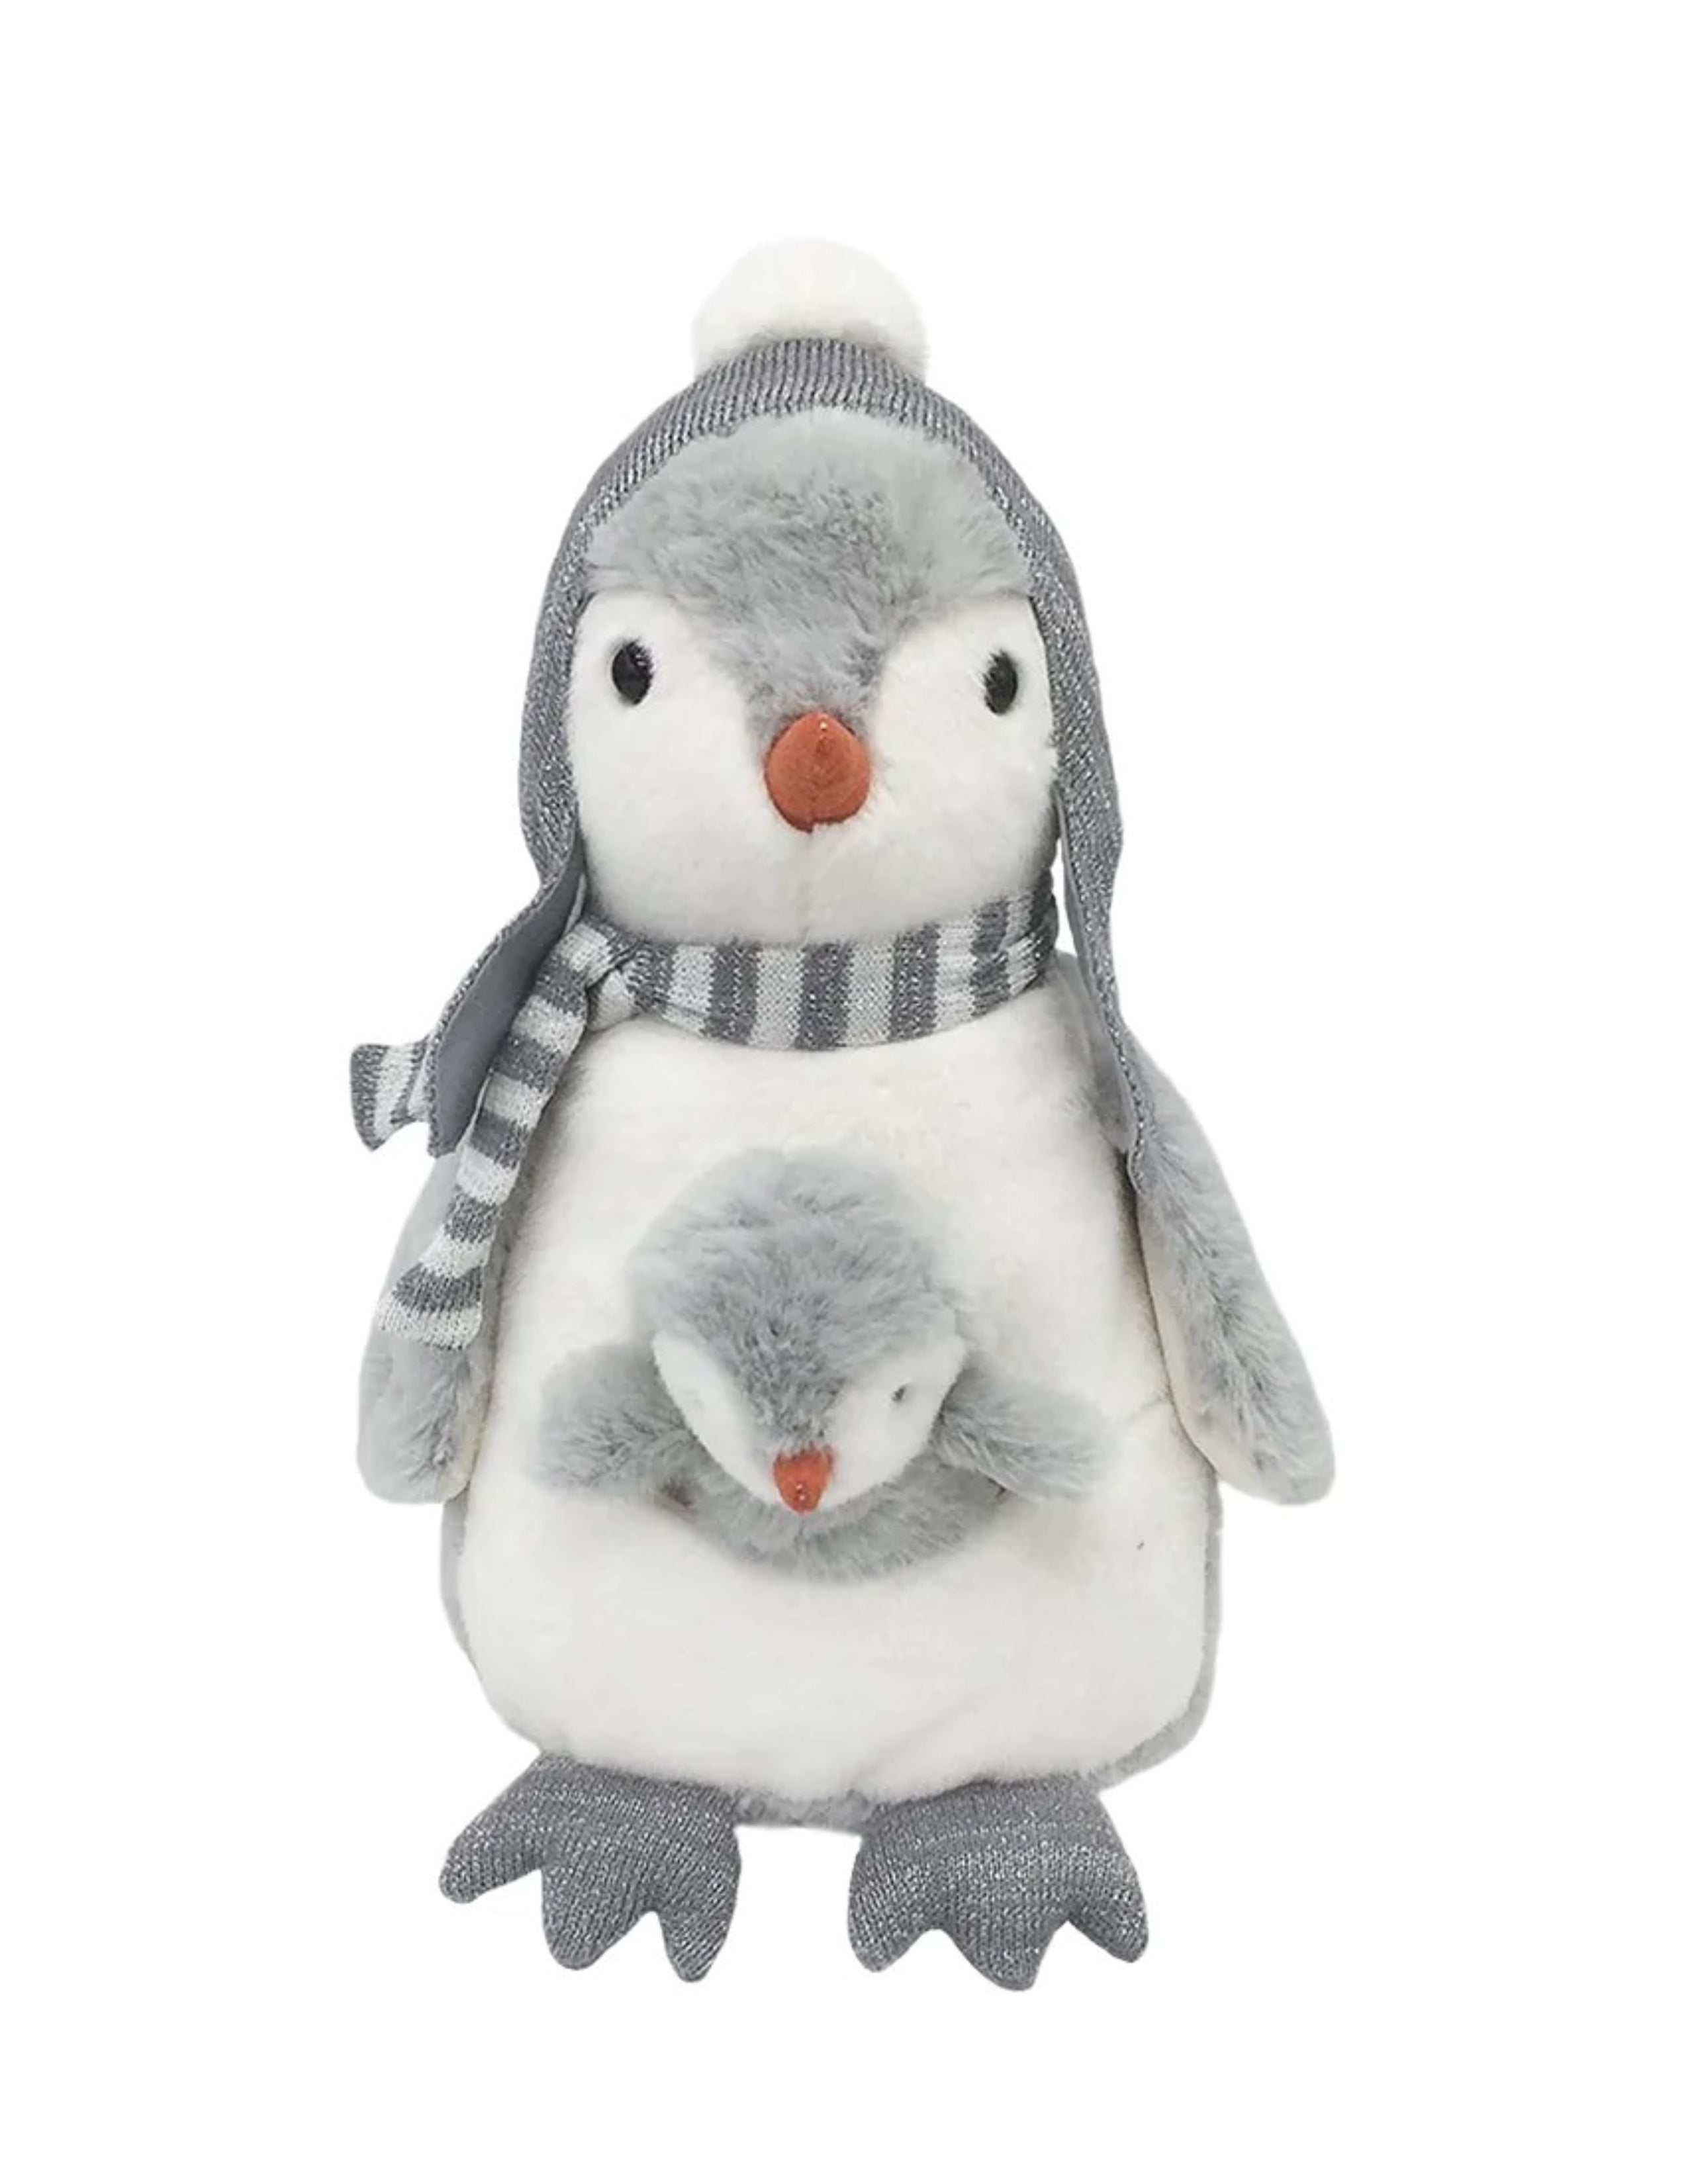 'Pebble' The Penguin and Baby